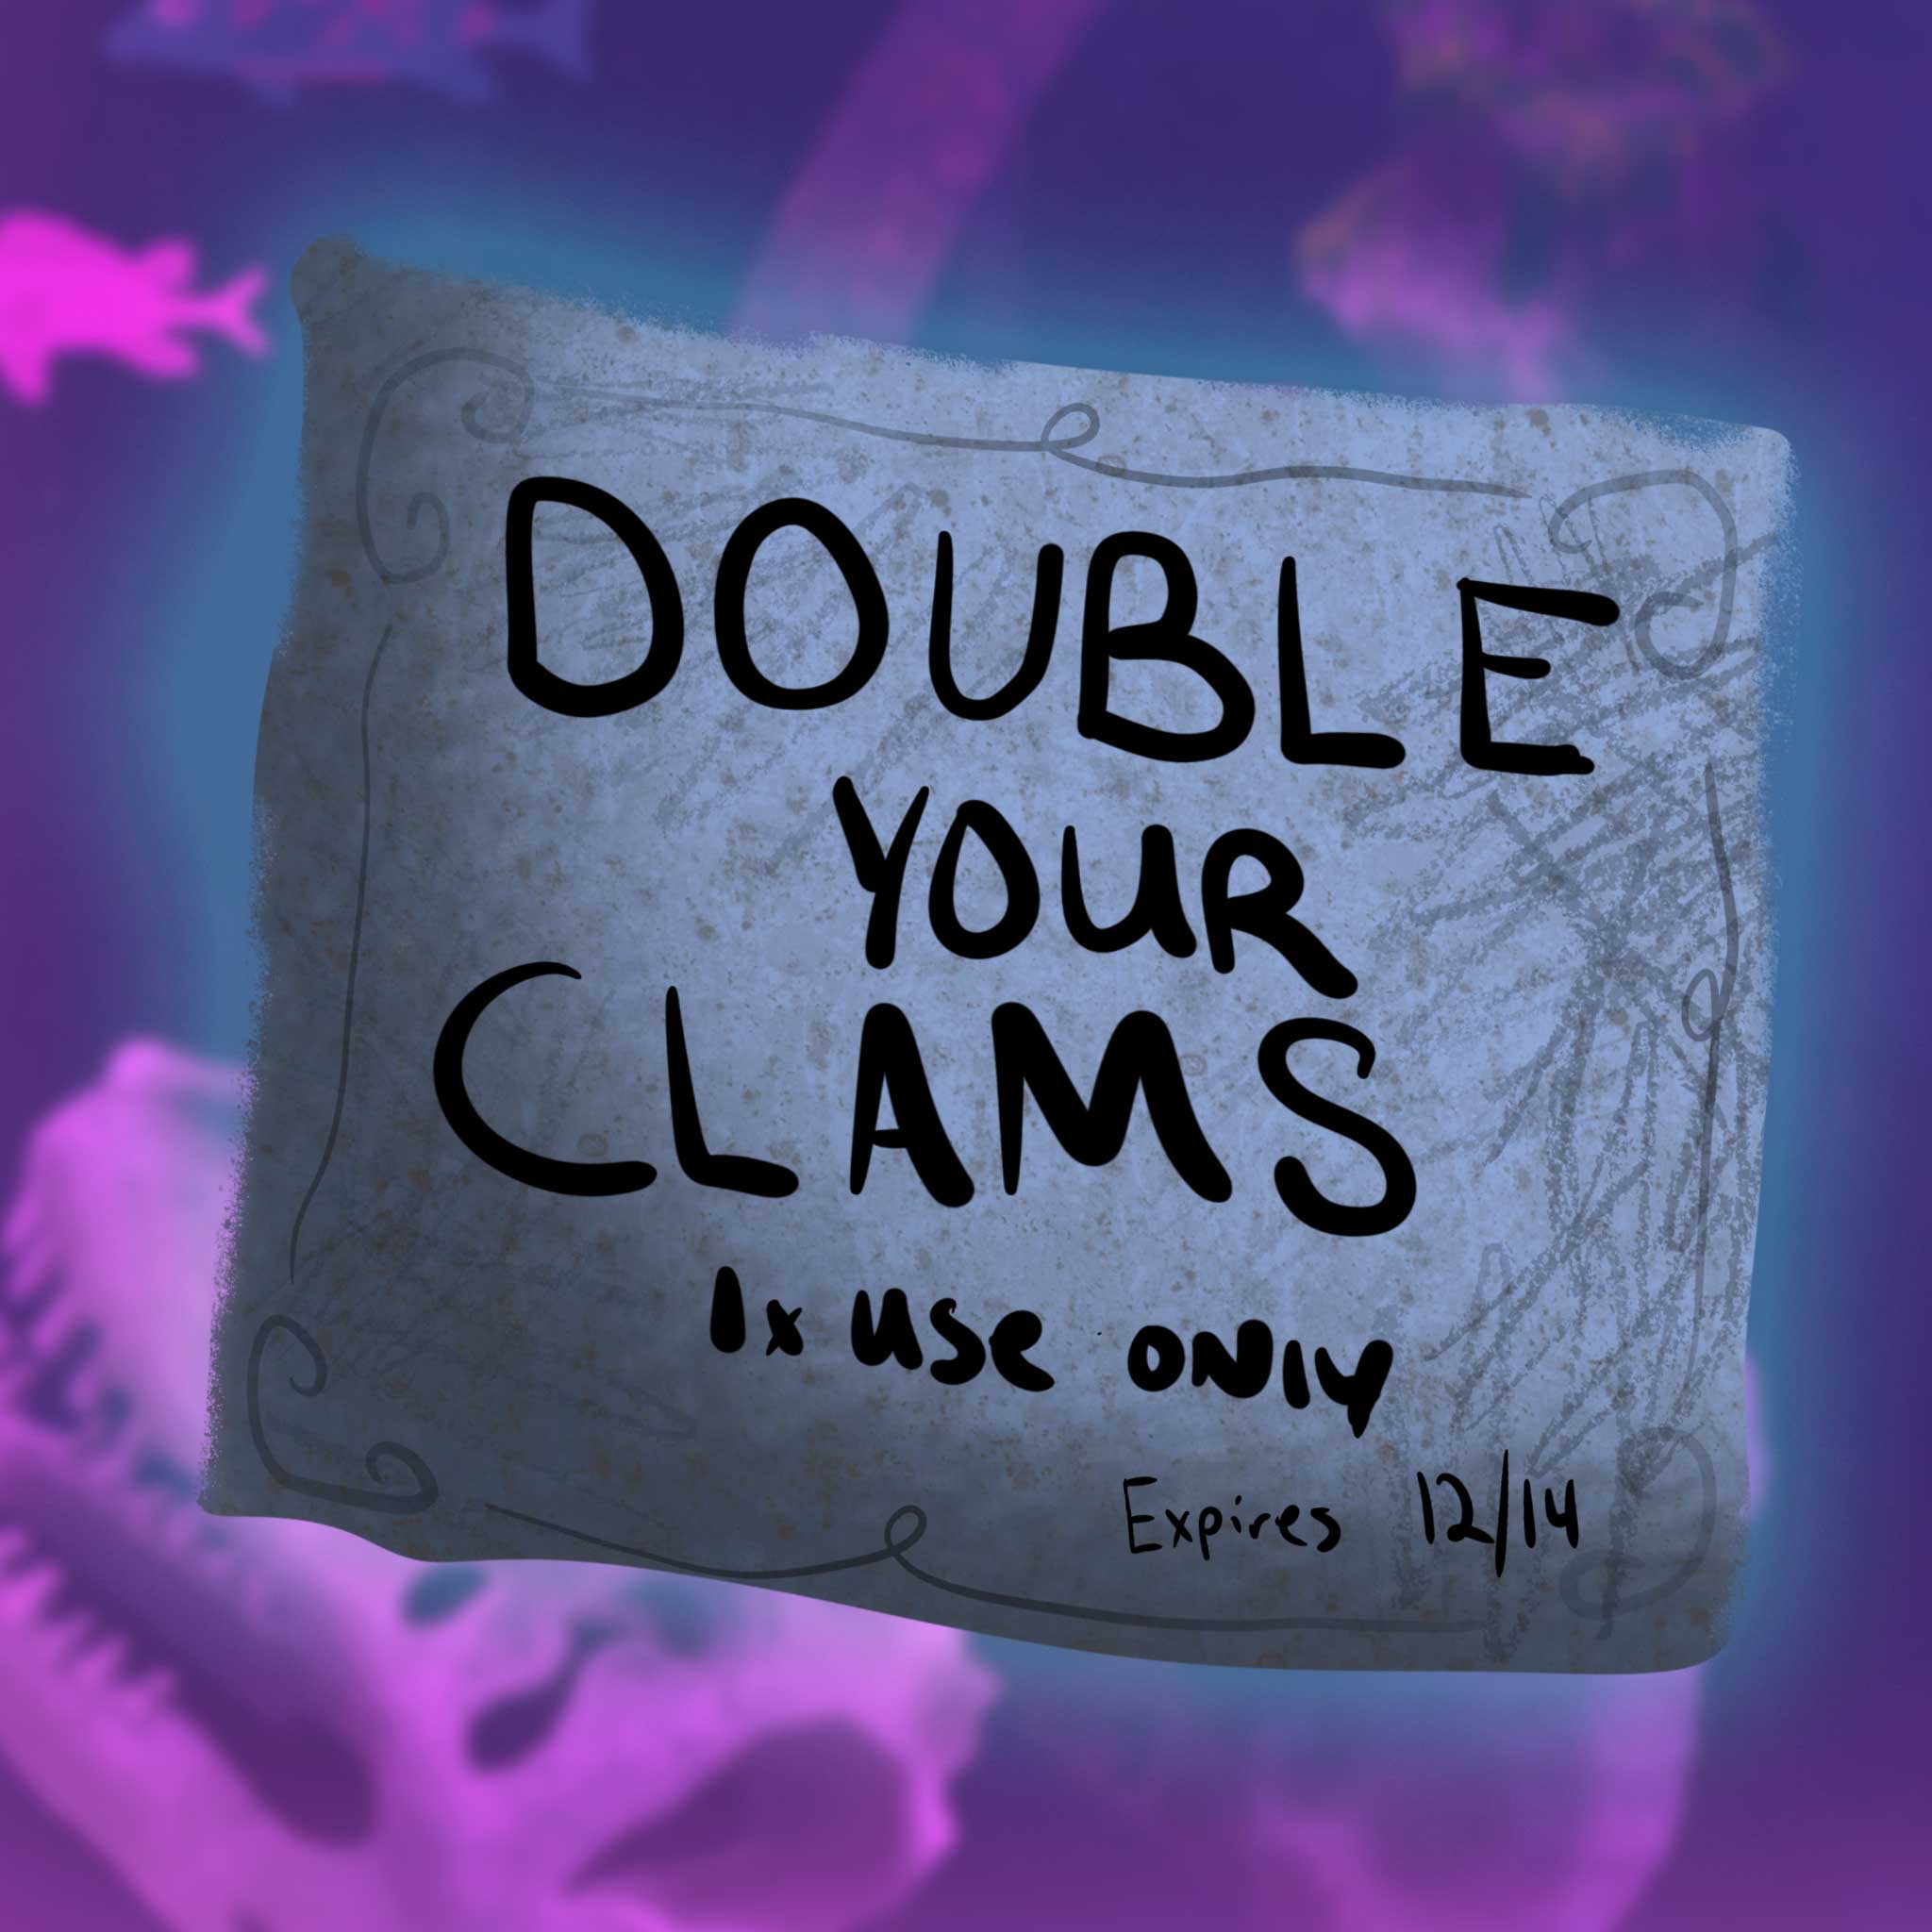 The Double Your Clams Pass